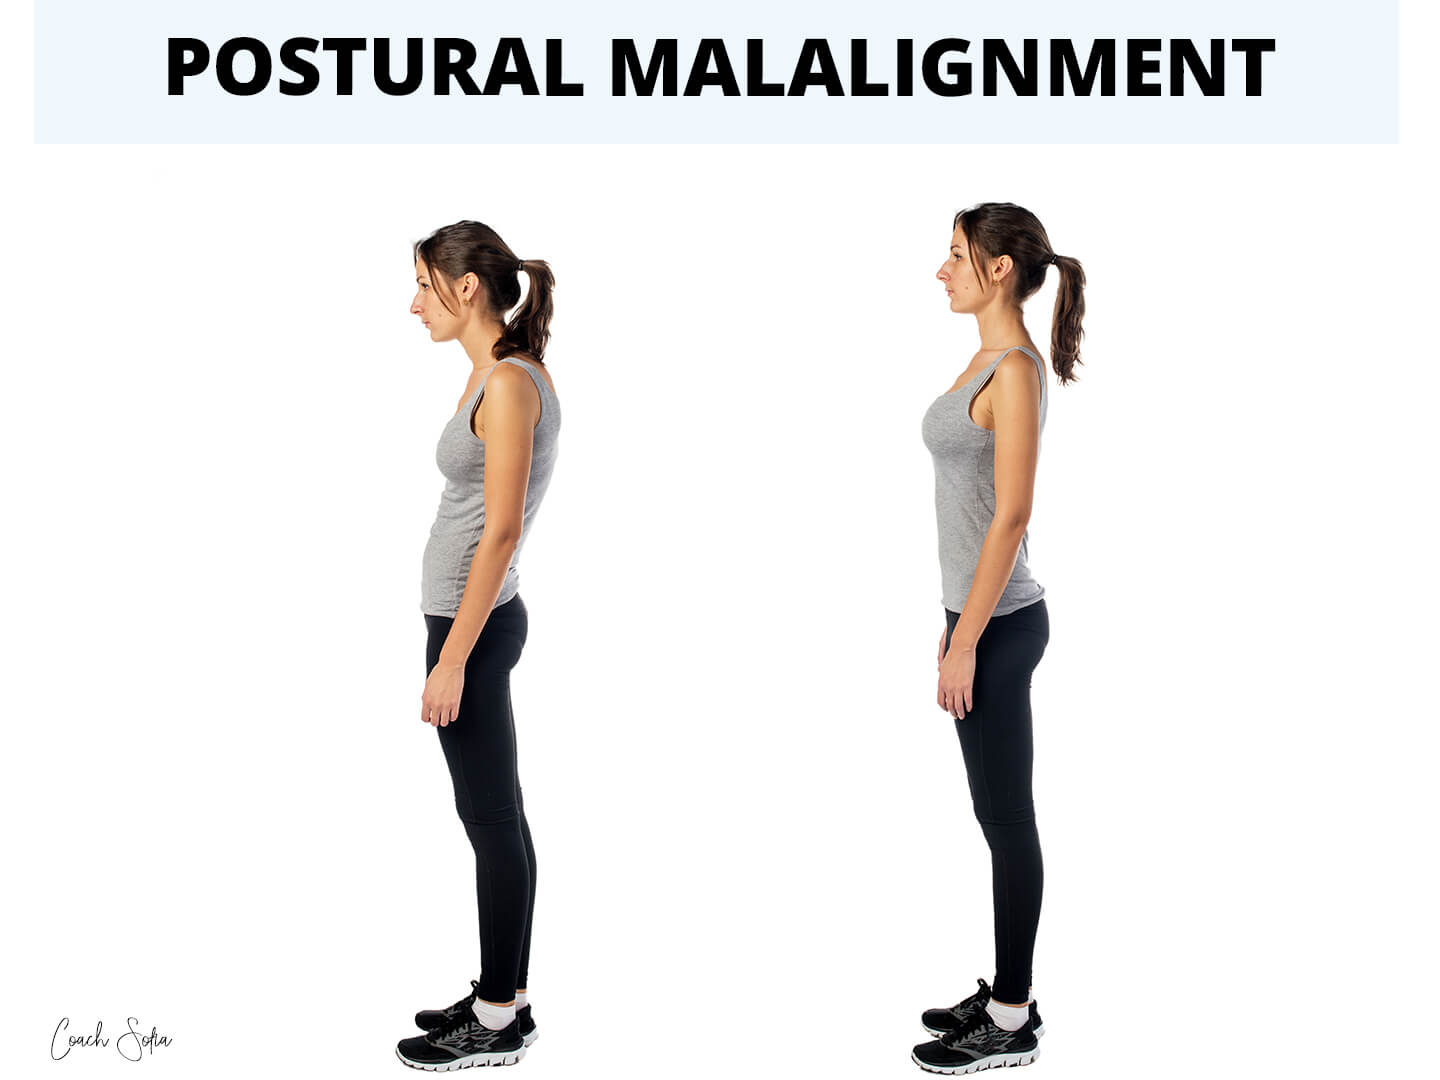 rounded shoudlers forward head posture